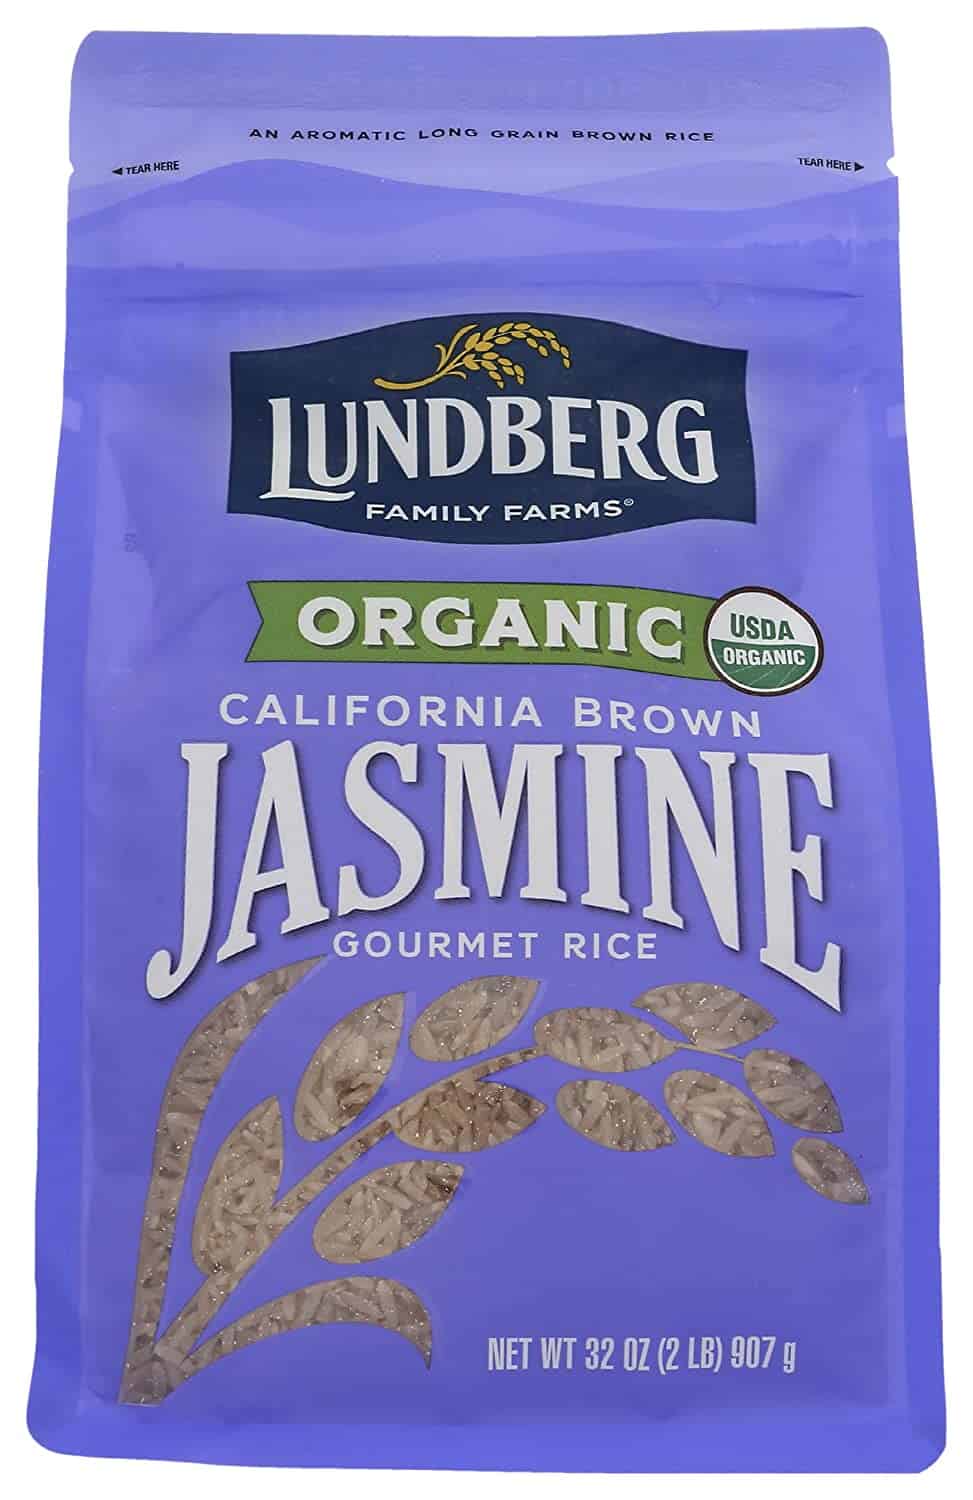 Brown jasmine rice as a substitute for basmati rice